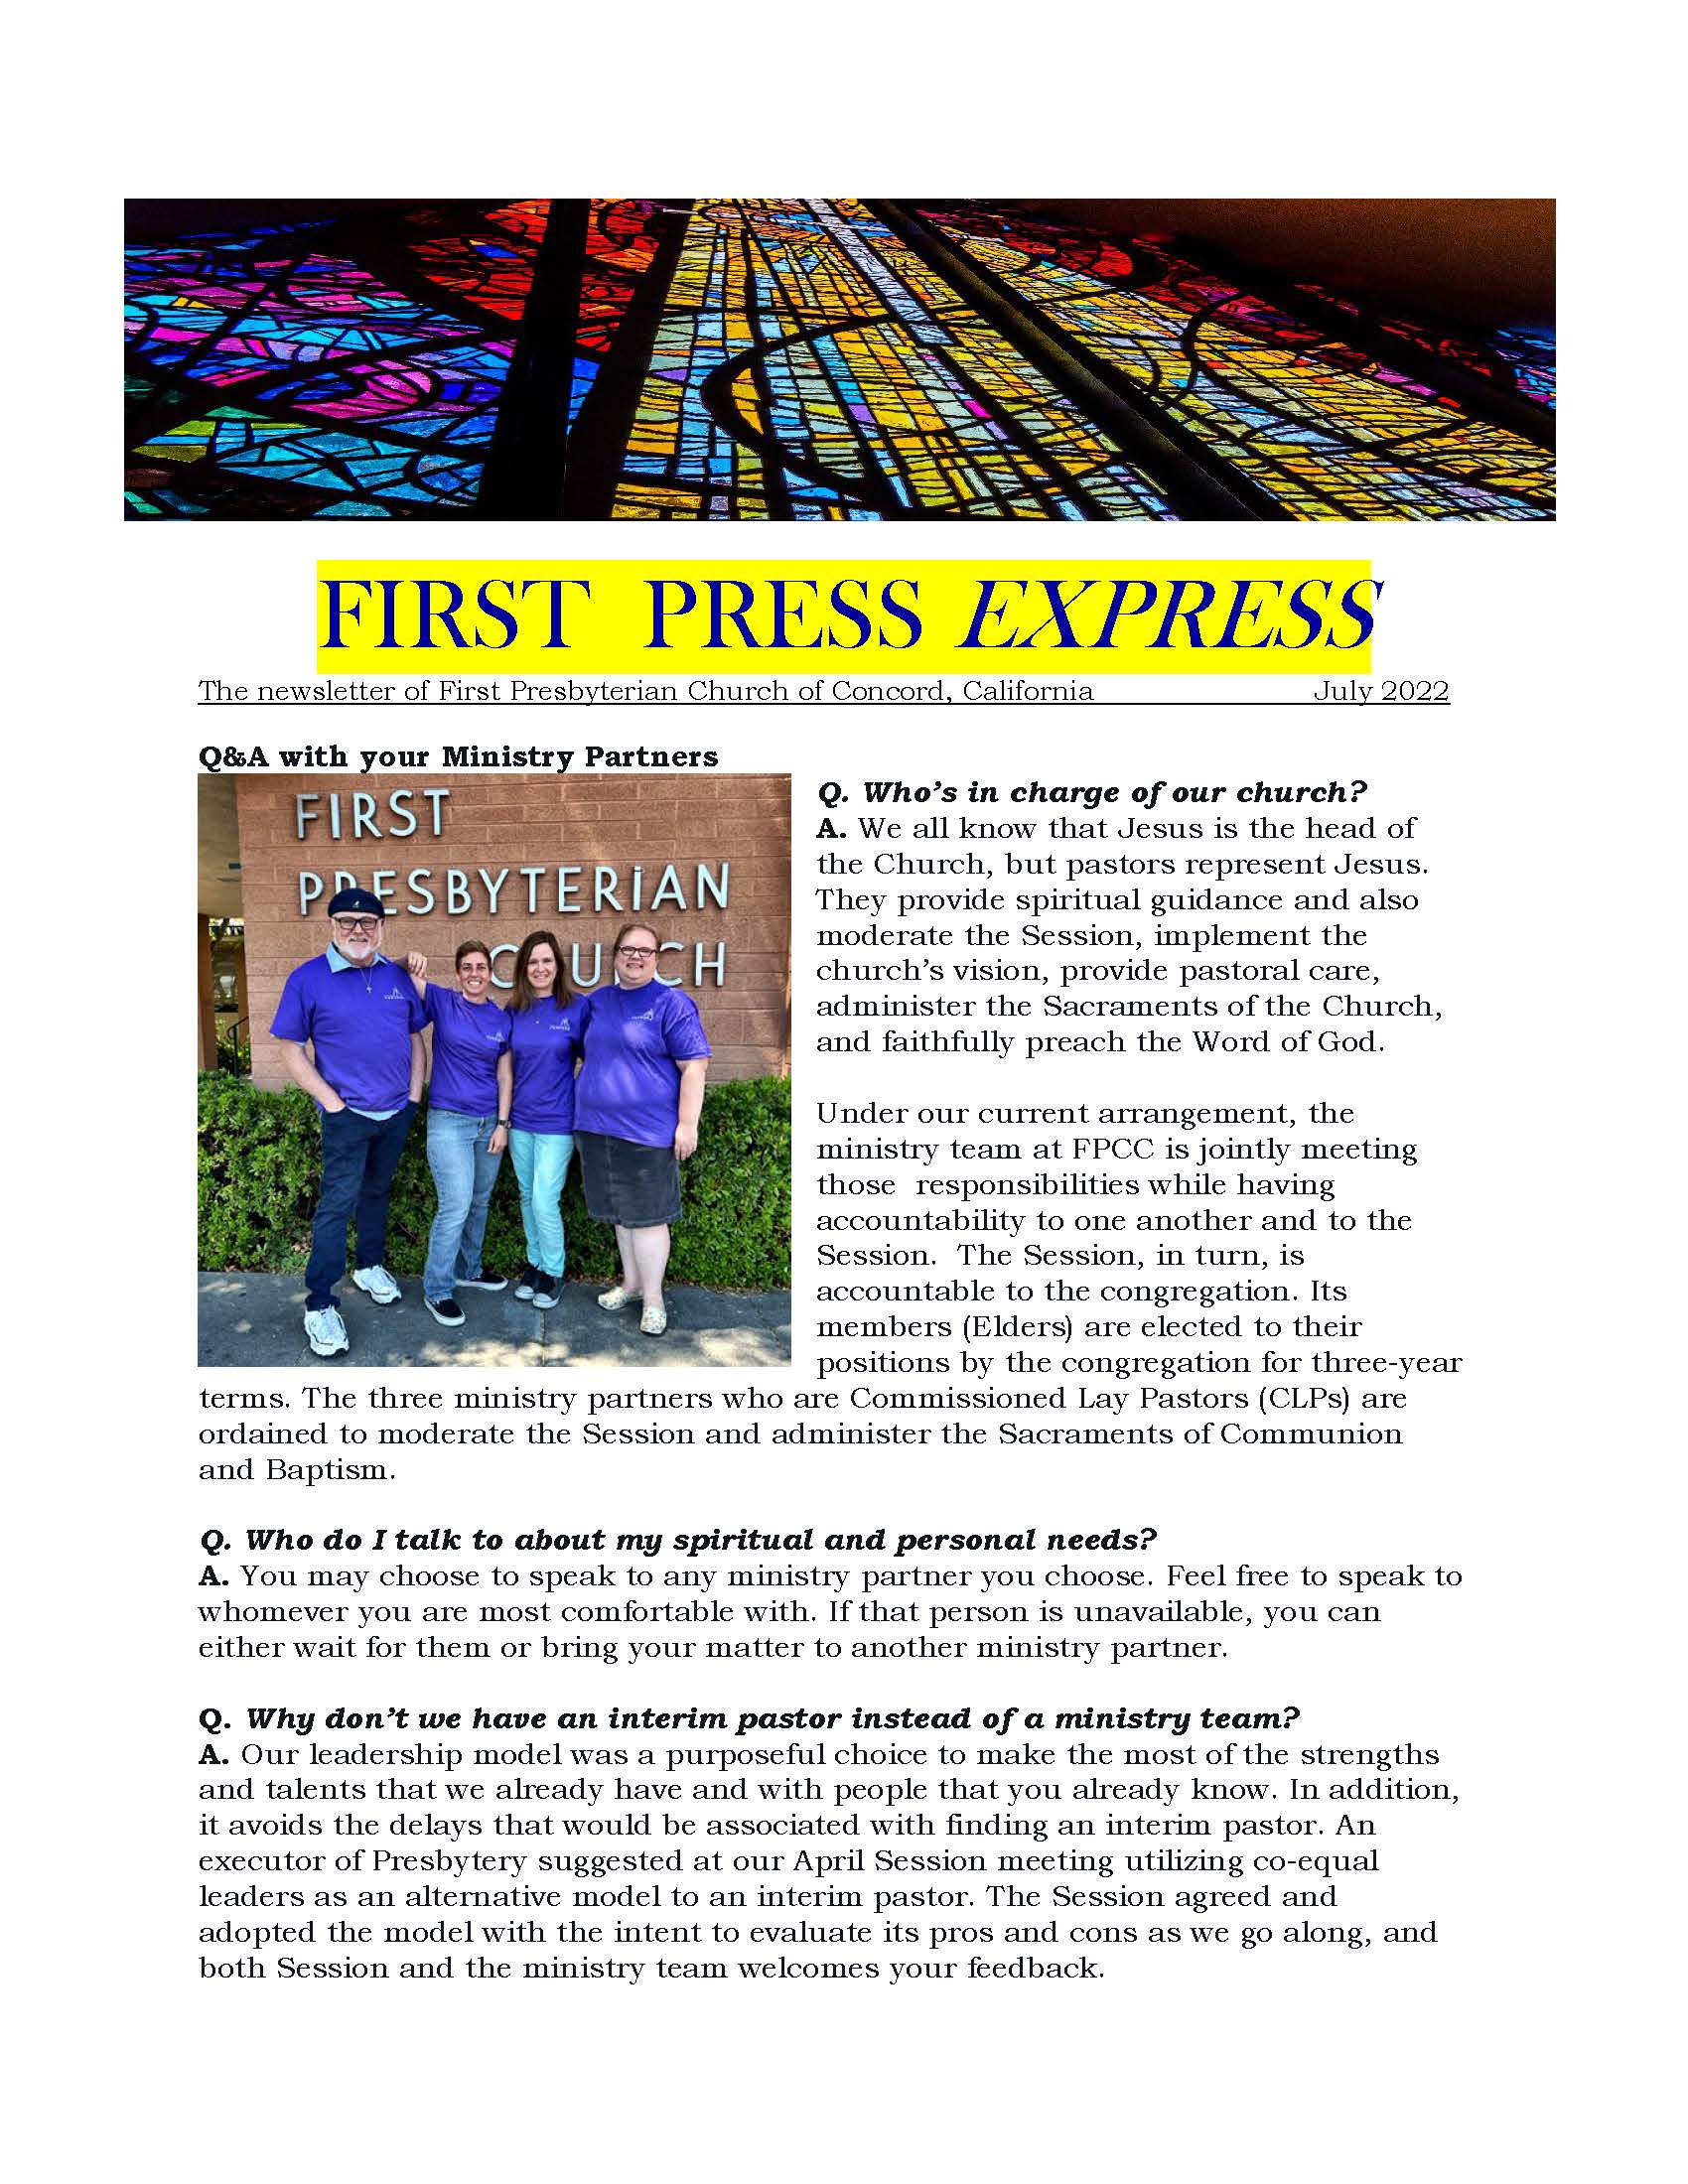 cover of first press express July 2022